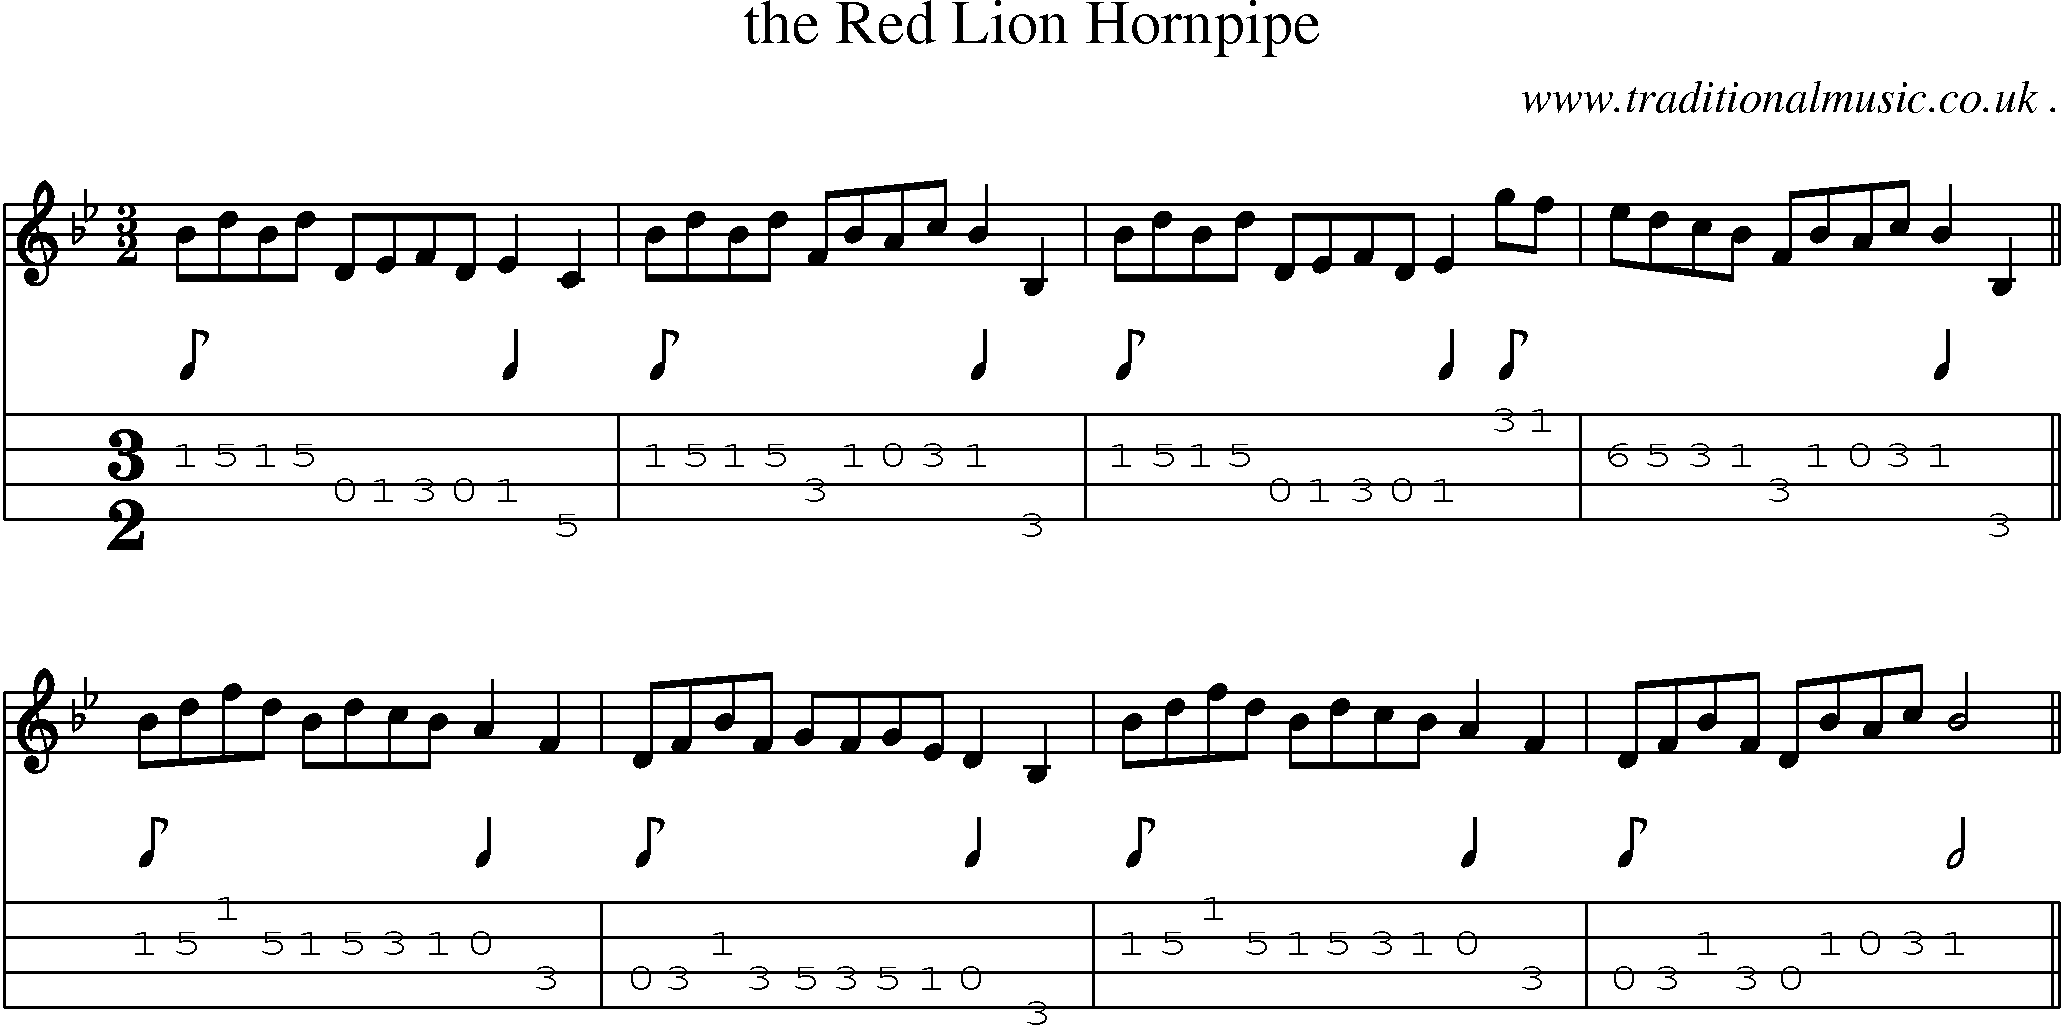 Sheet-Music and Mandolin Tabs for The Red Lion Hornpipe